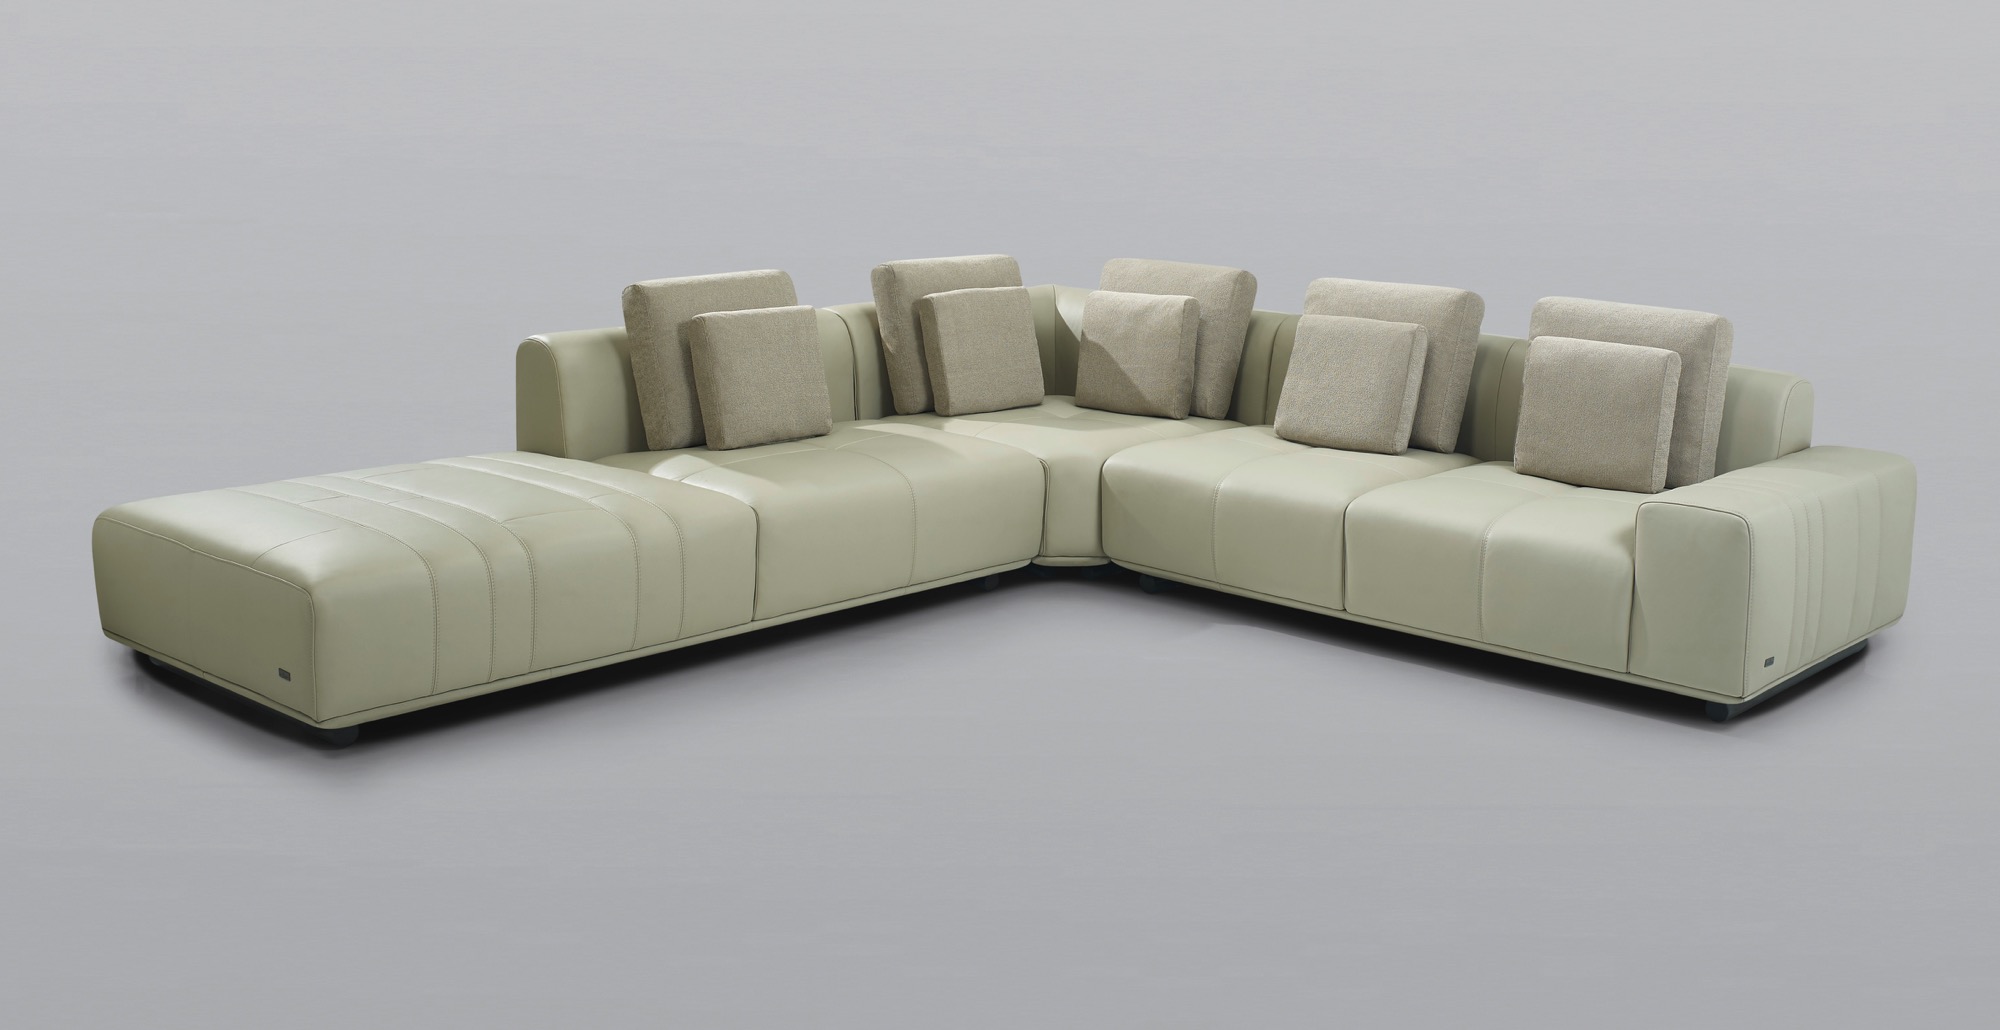 A picture of a tan leather sectional sofa on a grey background